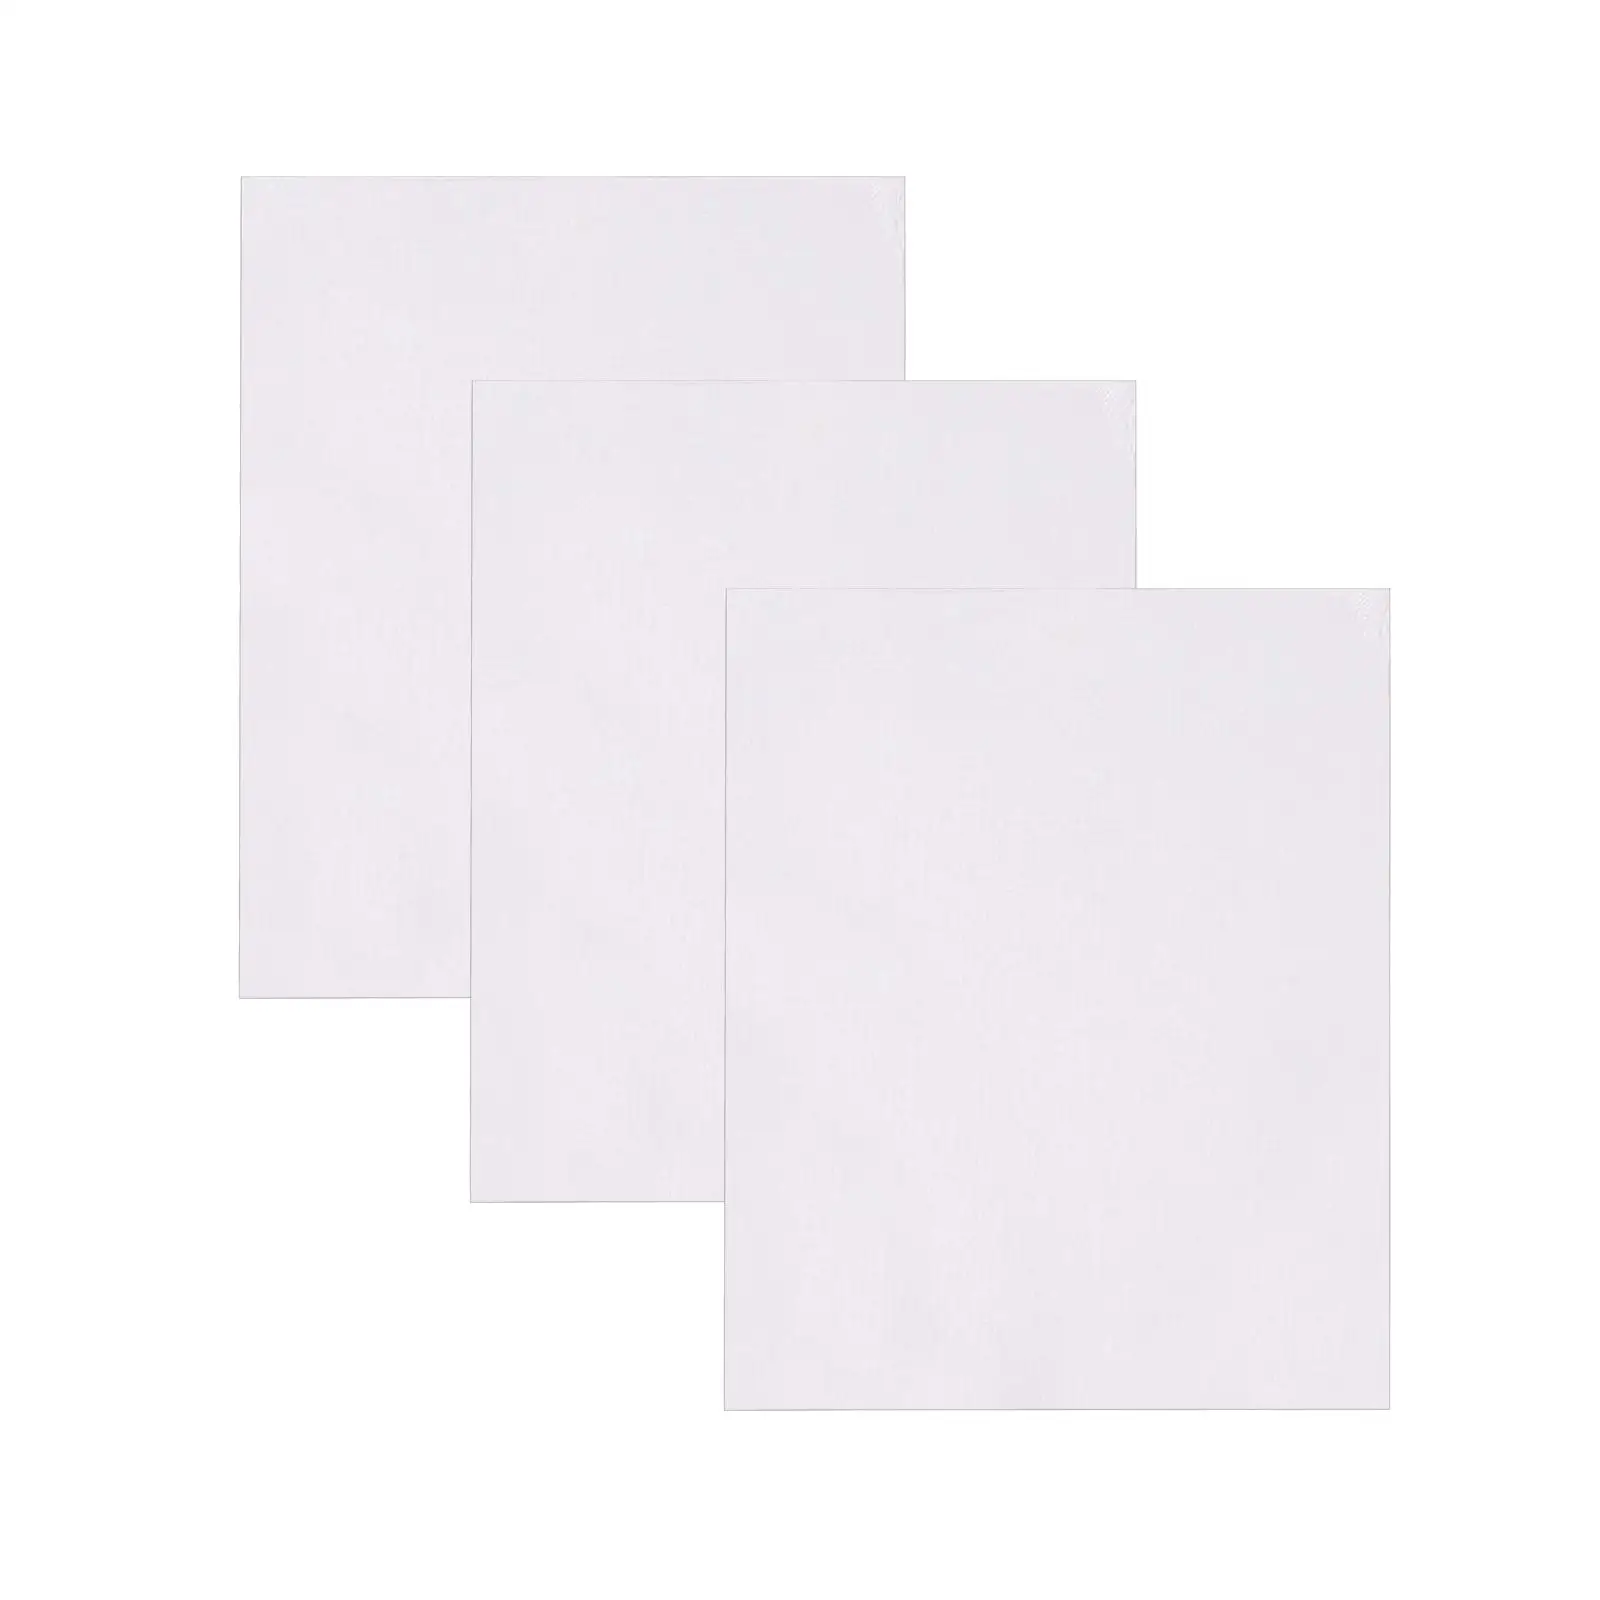 3x Cotton Artist Blank Canvas Boards Acrylic Oil Painting Canvas Panels for Amateurs Oil Painting Adults Kids Beginners Students